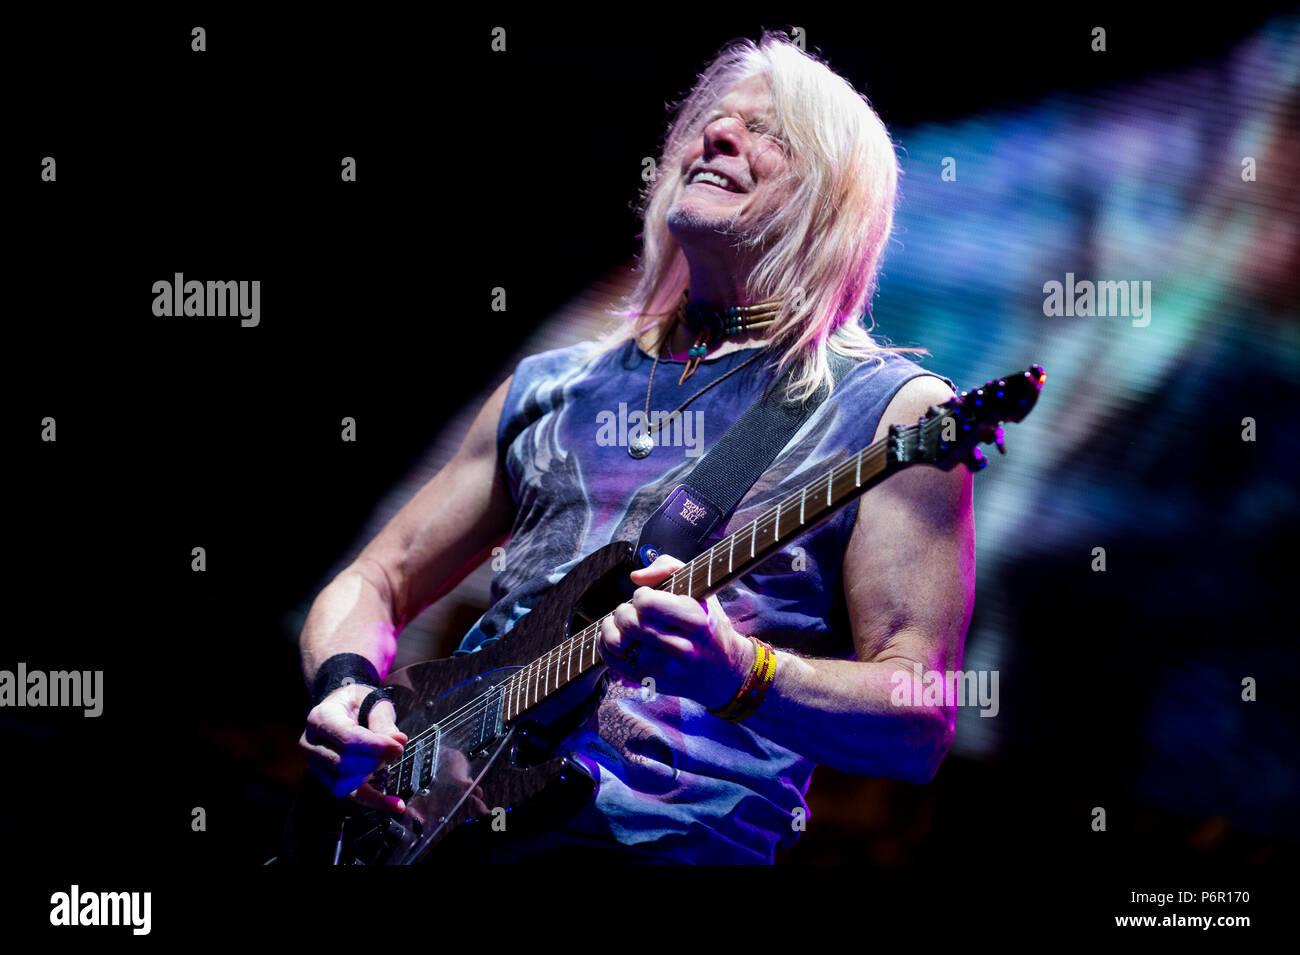 Deep Purple guitar player, Steve Morse performs. Deep purple band performs at Tauron Arena Krakow as part of the farewell tour, The Long Goodbye Tour. Stock Photo